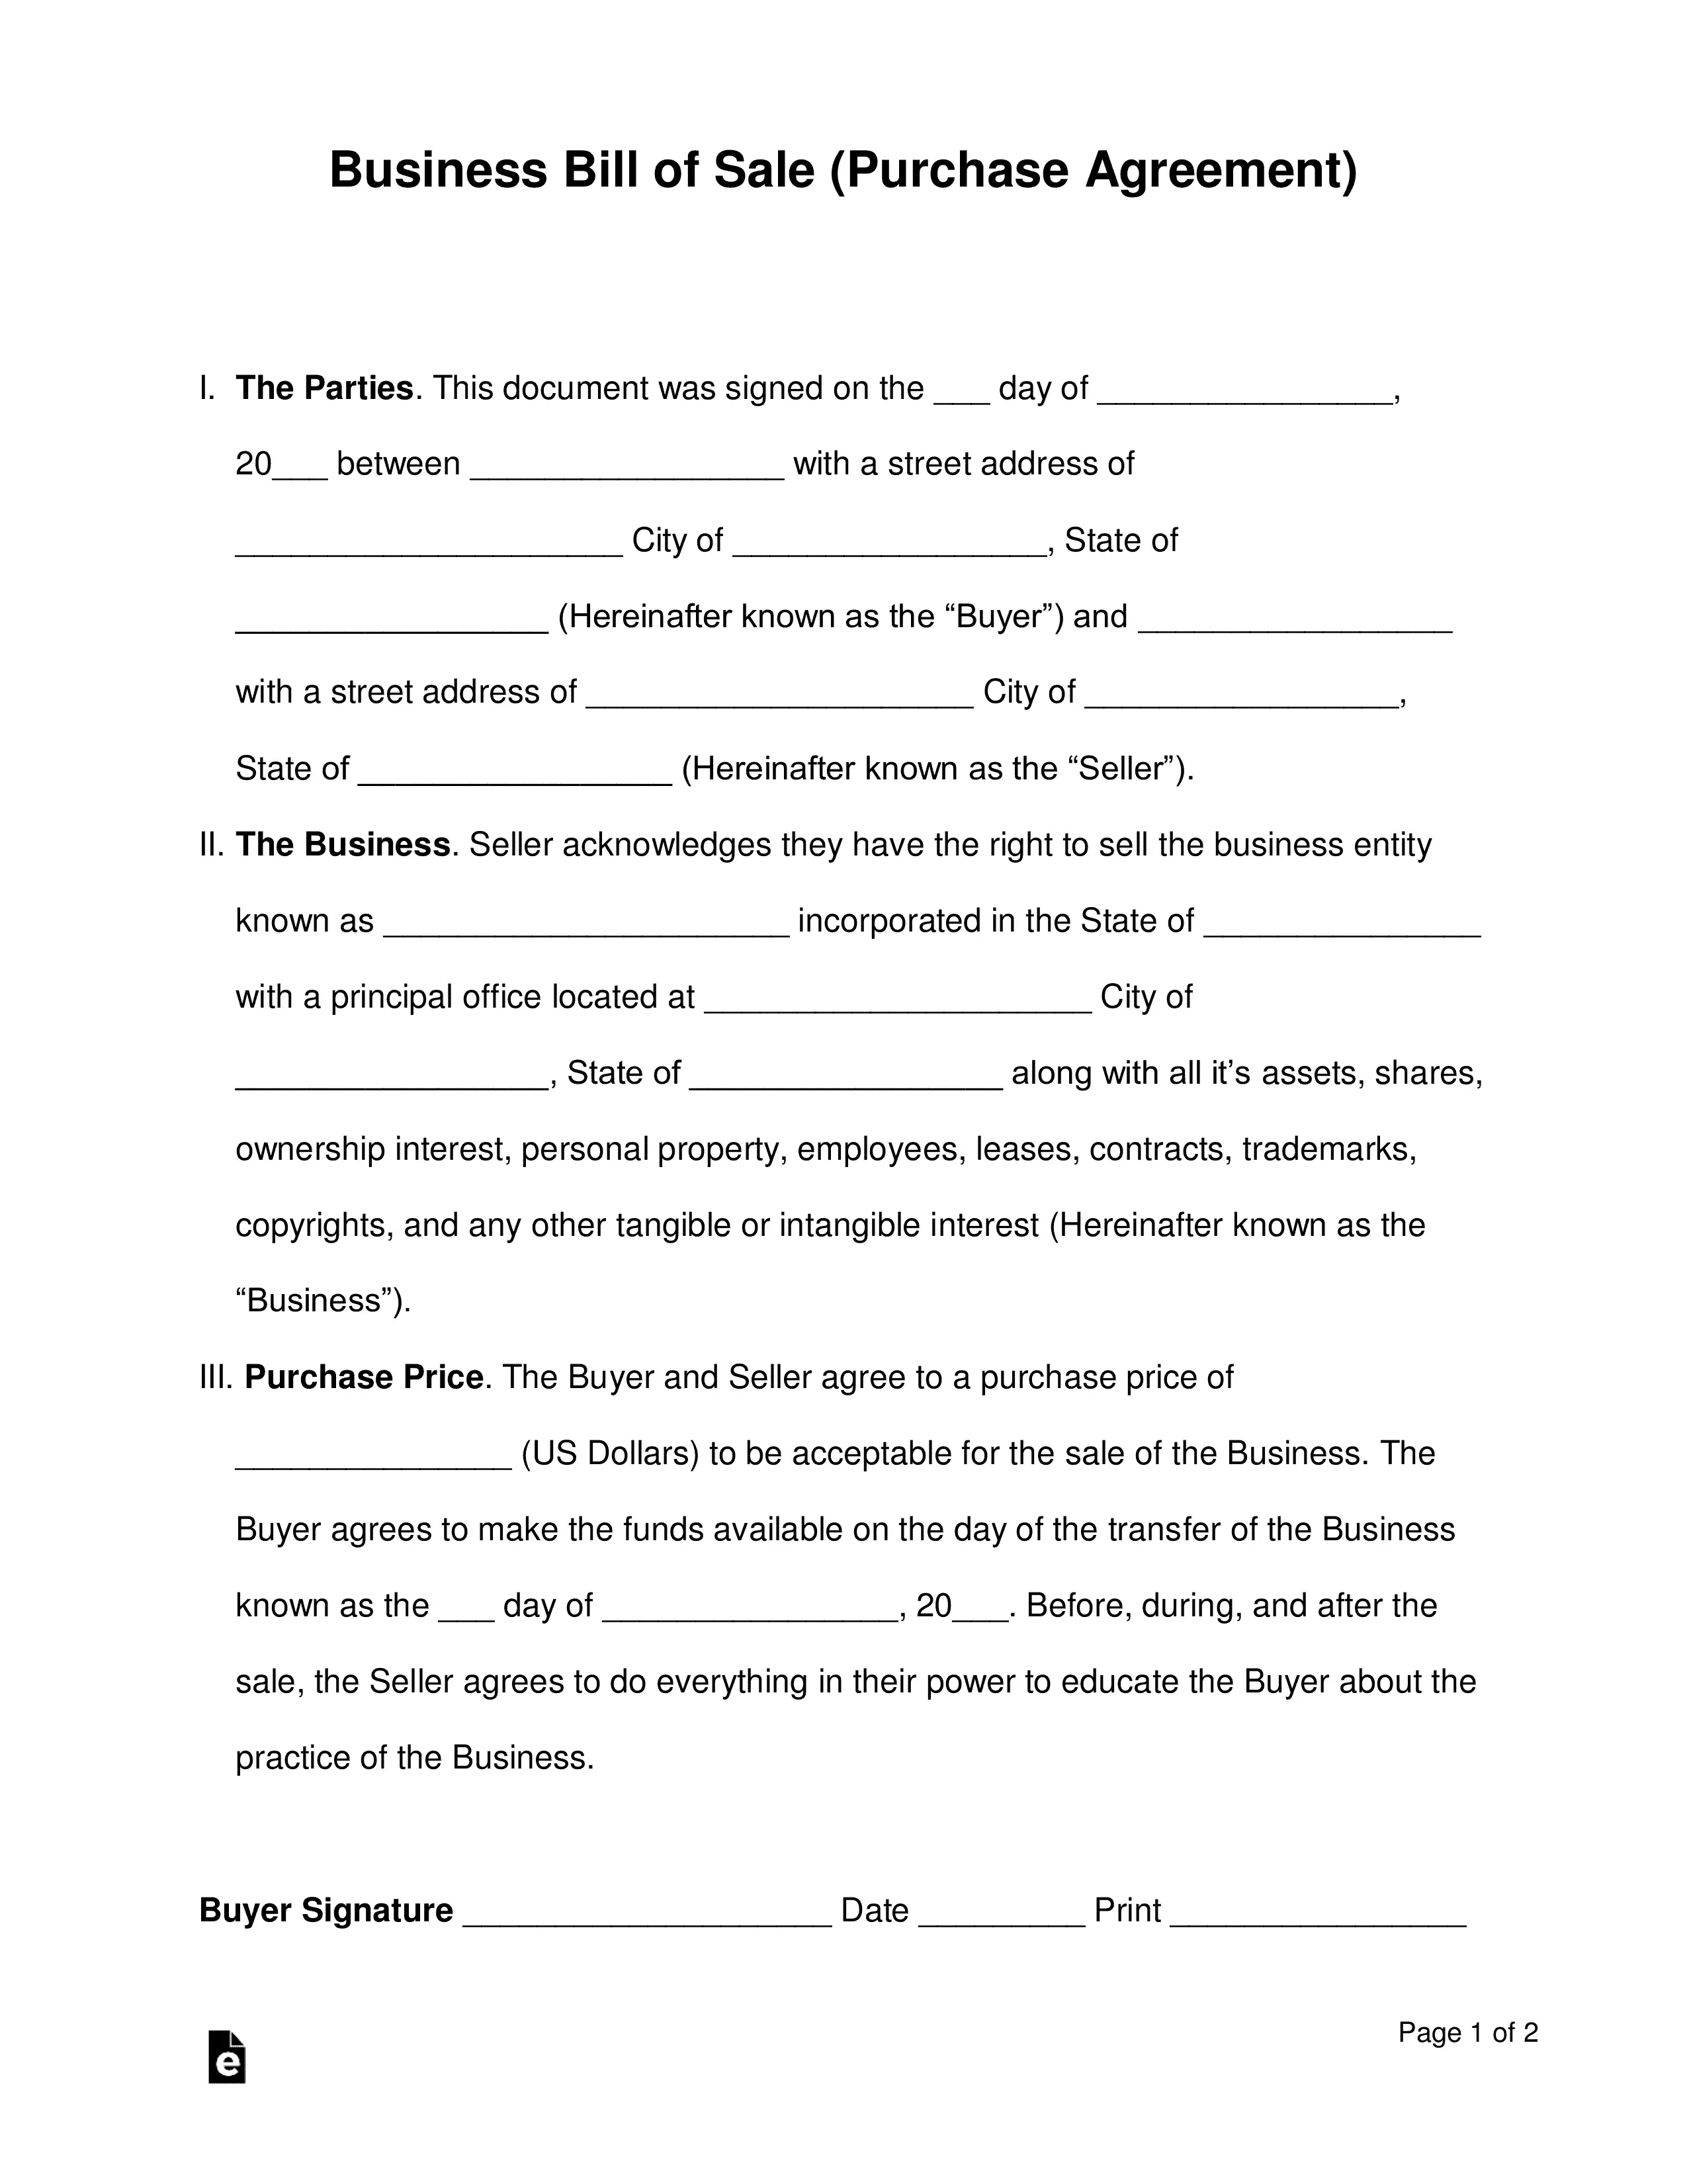 business bill of sale by seller with selling information and details agreement